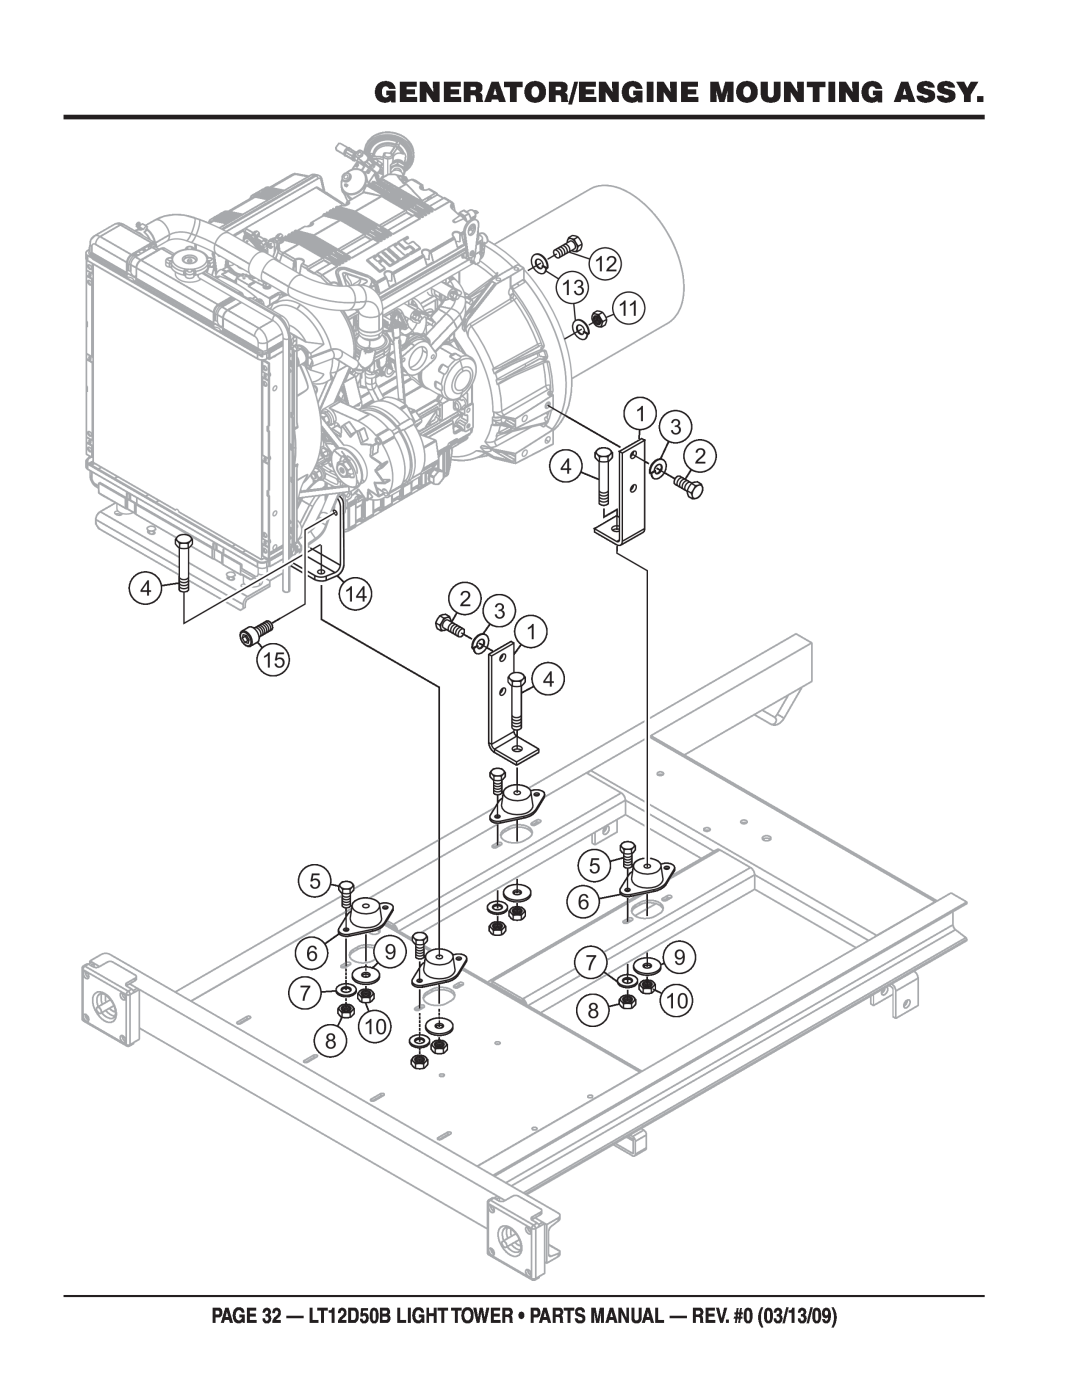 Multiquip manual Generator/Engine Mounting Assy, PAGE 32 - LT12D50B LIGHT TOWER PARTS MANUAL - REV. #0 03/13/09 